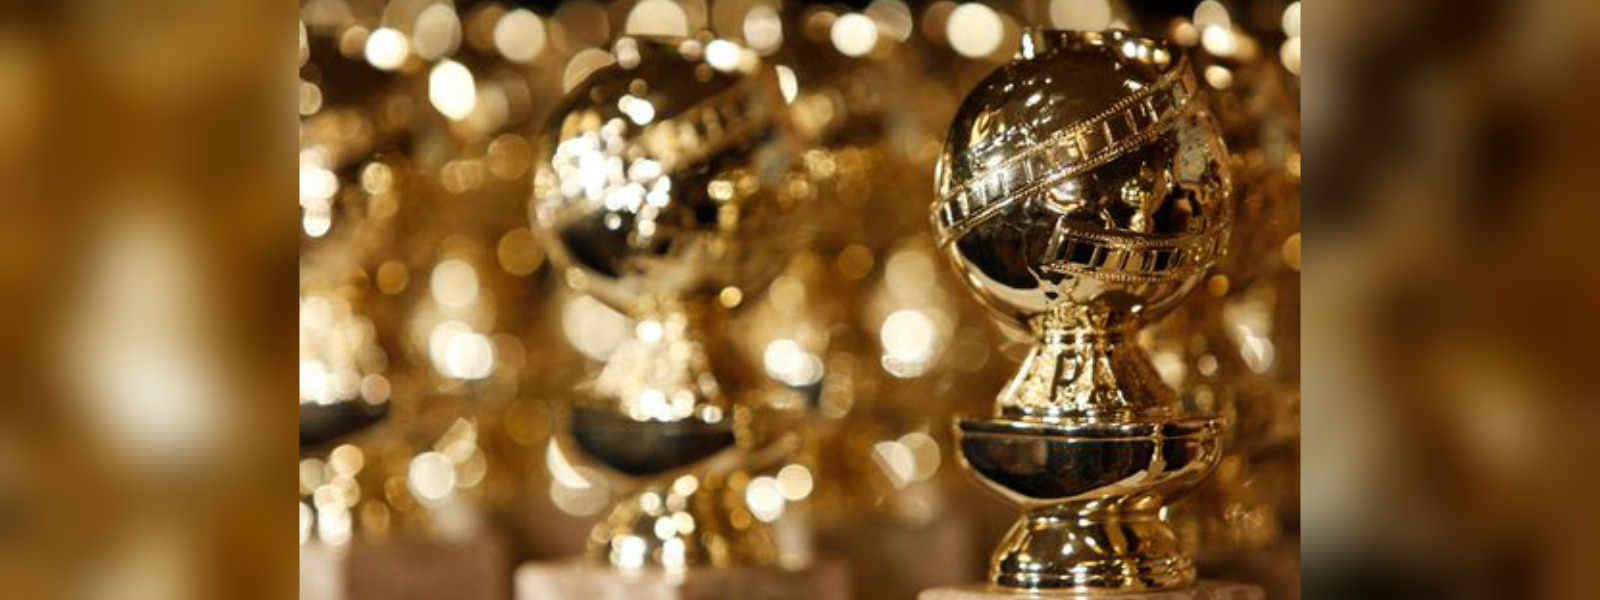 The movies nominated for the 2019 Golden Globes